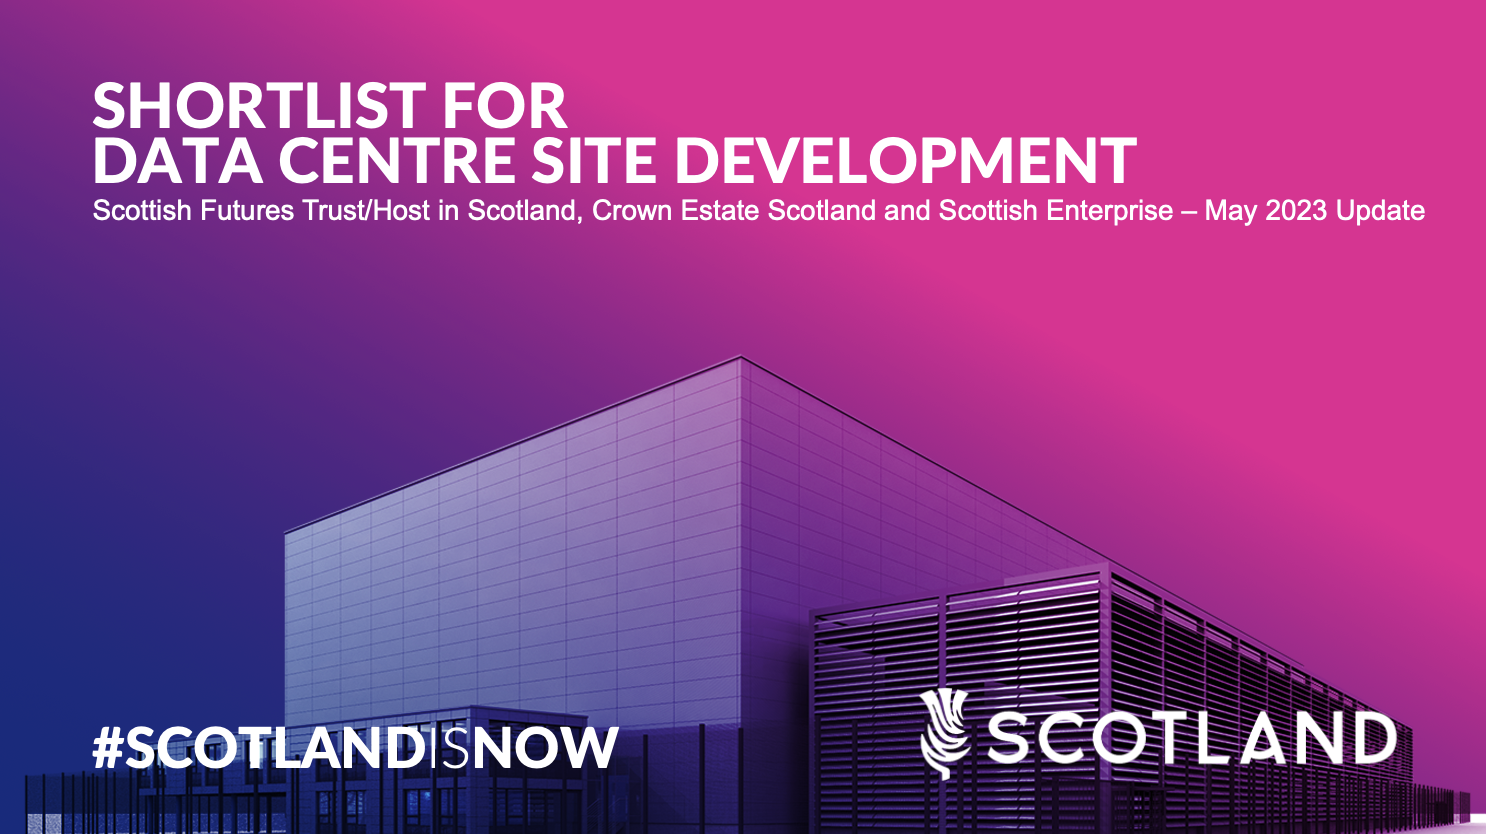 Report identifies new opportunities for data centres in Scotland